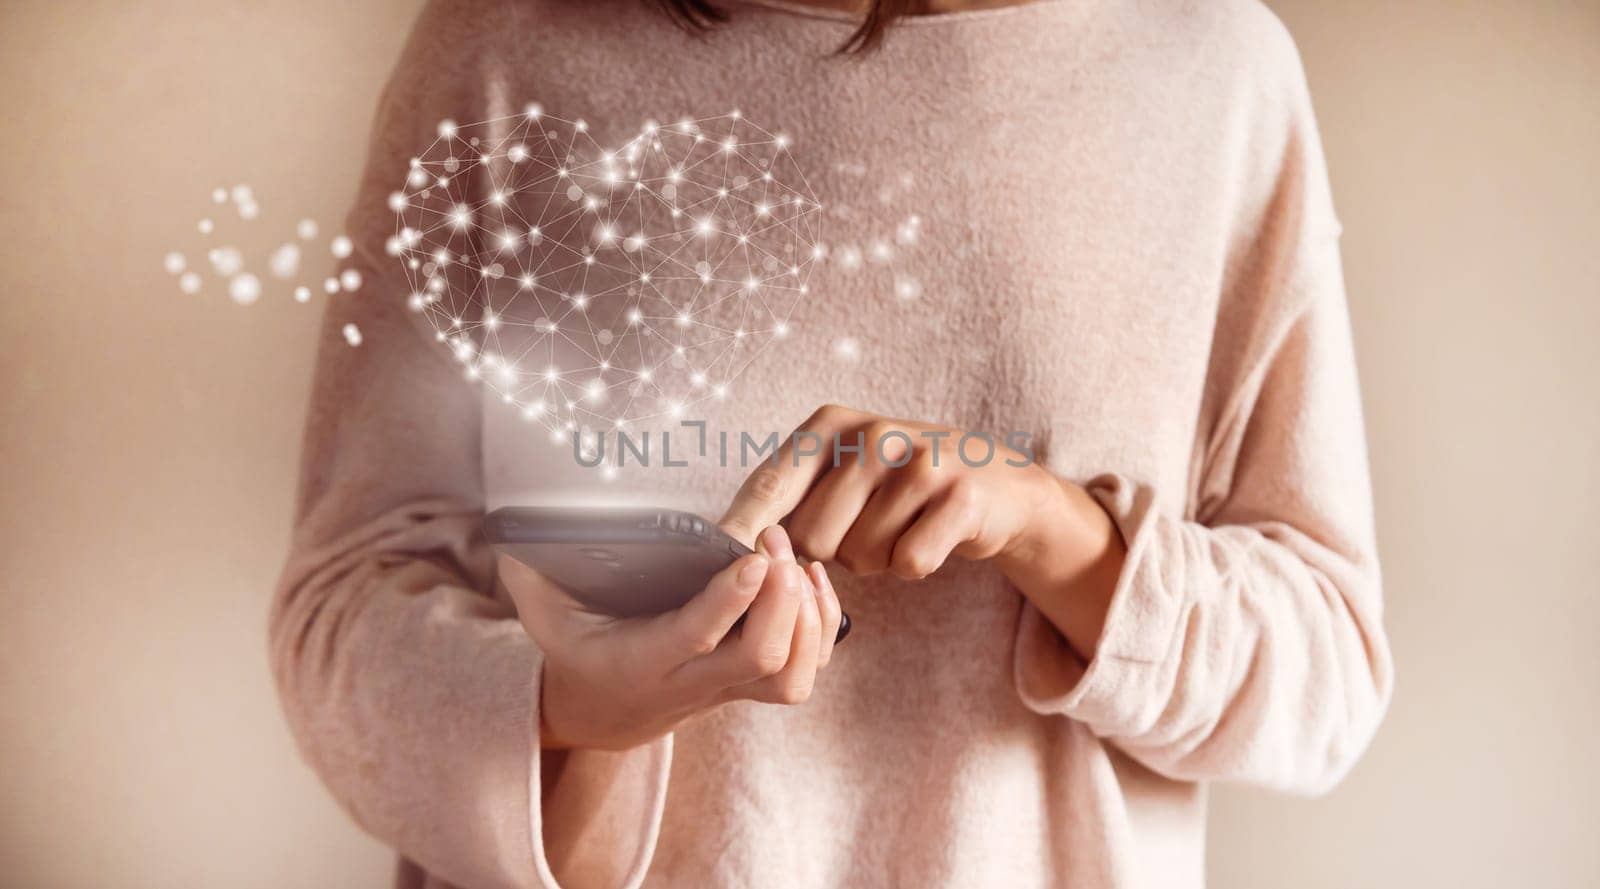 Young girl holds a phone in her hands, sends hearts to friends and family, closeup view of hands and a drawed glowing bright heart. A woman rates an application, searches for relationships online.